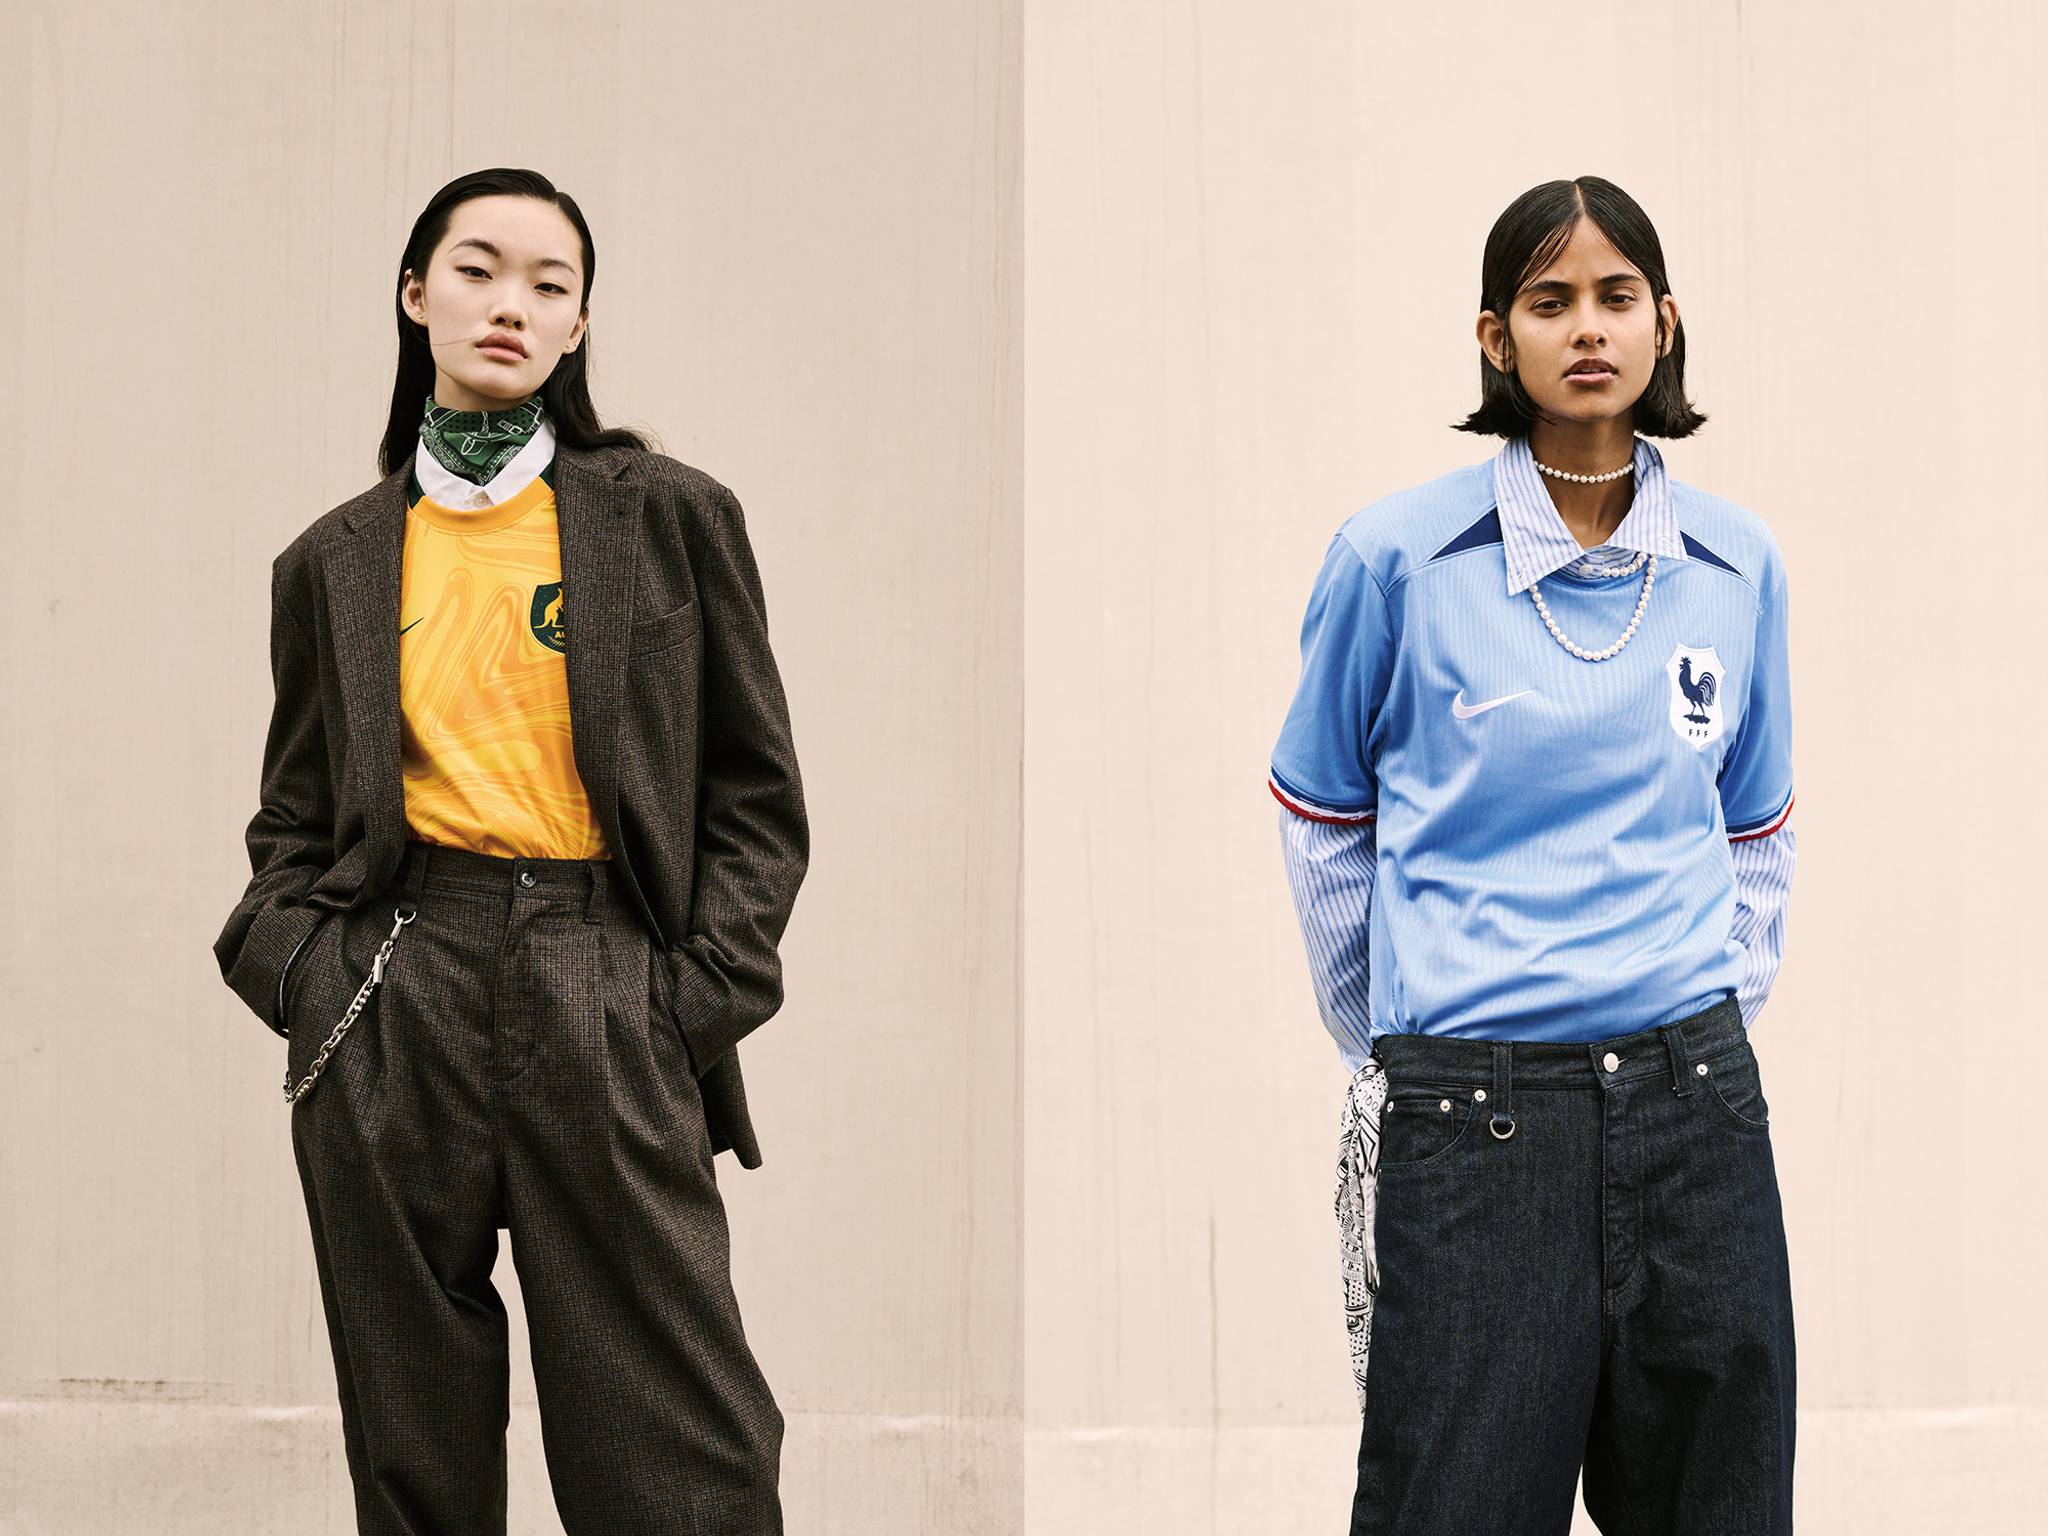 Nike blends women's football and fashion in Japan